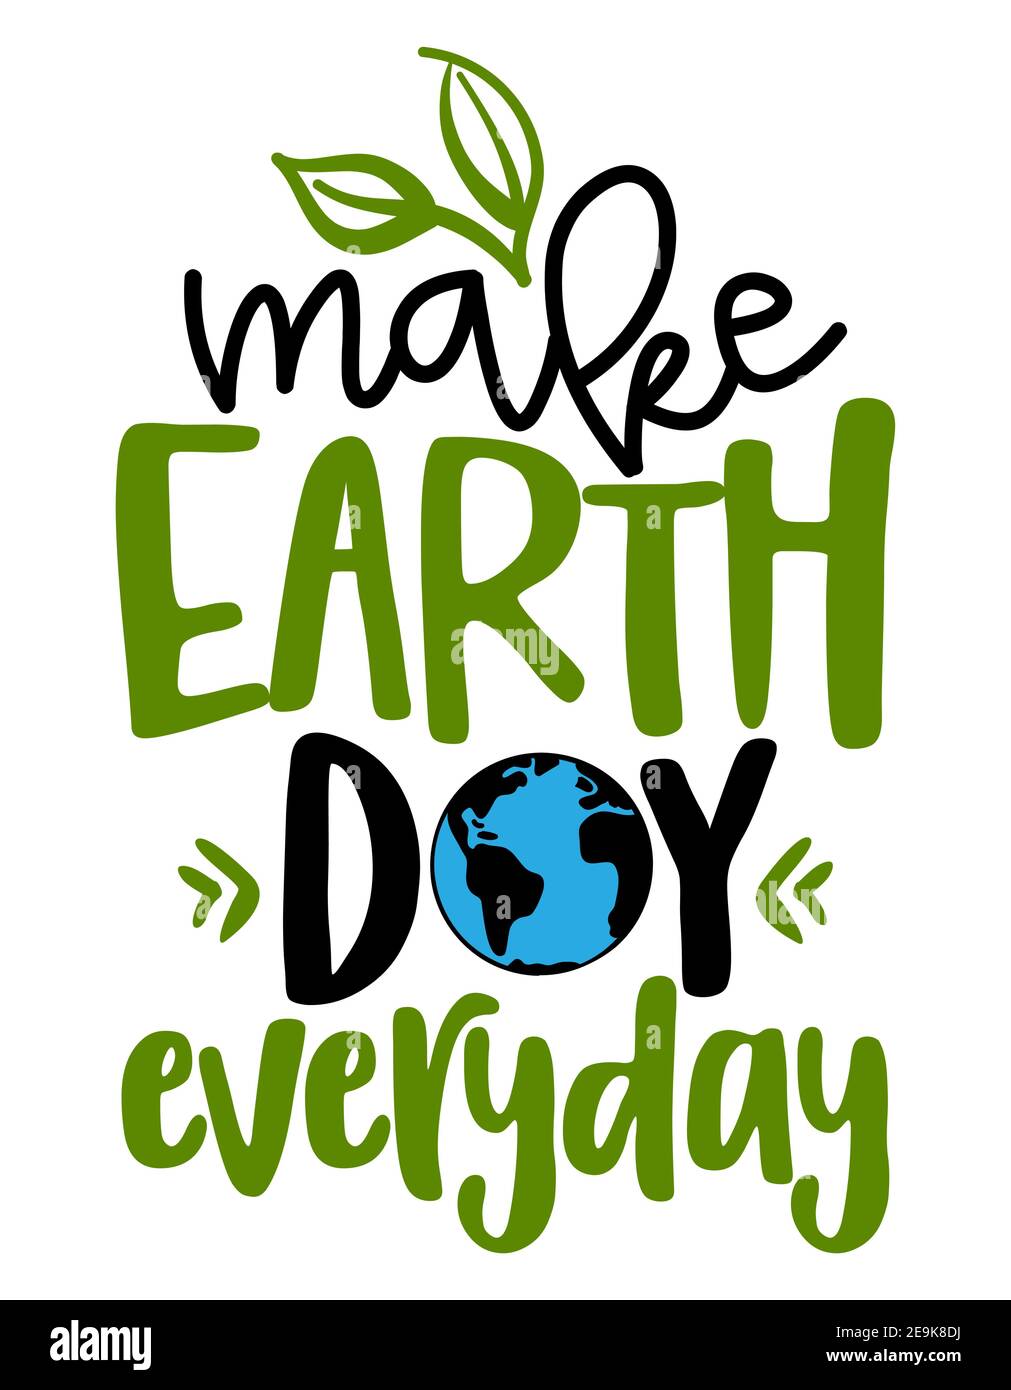 Make Earth Day everyday - text quotes and planet earth drawing with eco friendly quote. Lettering poster or t-shirt textile graphic design. environmen Stock Vector